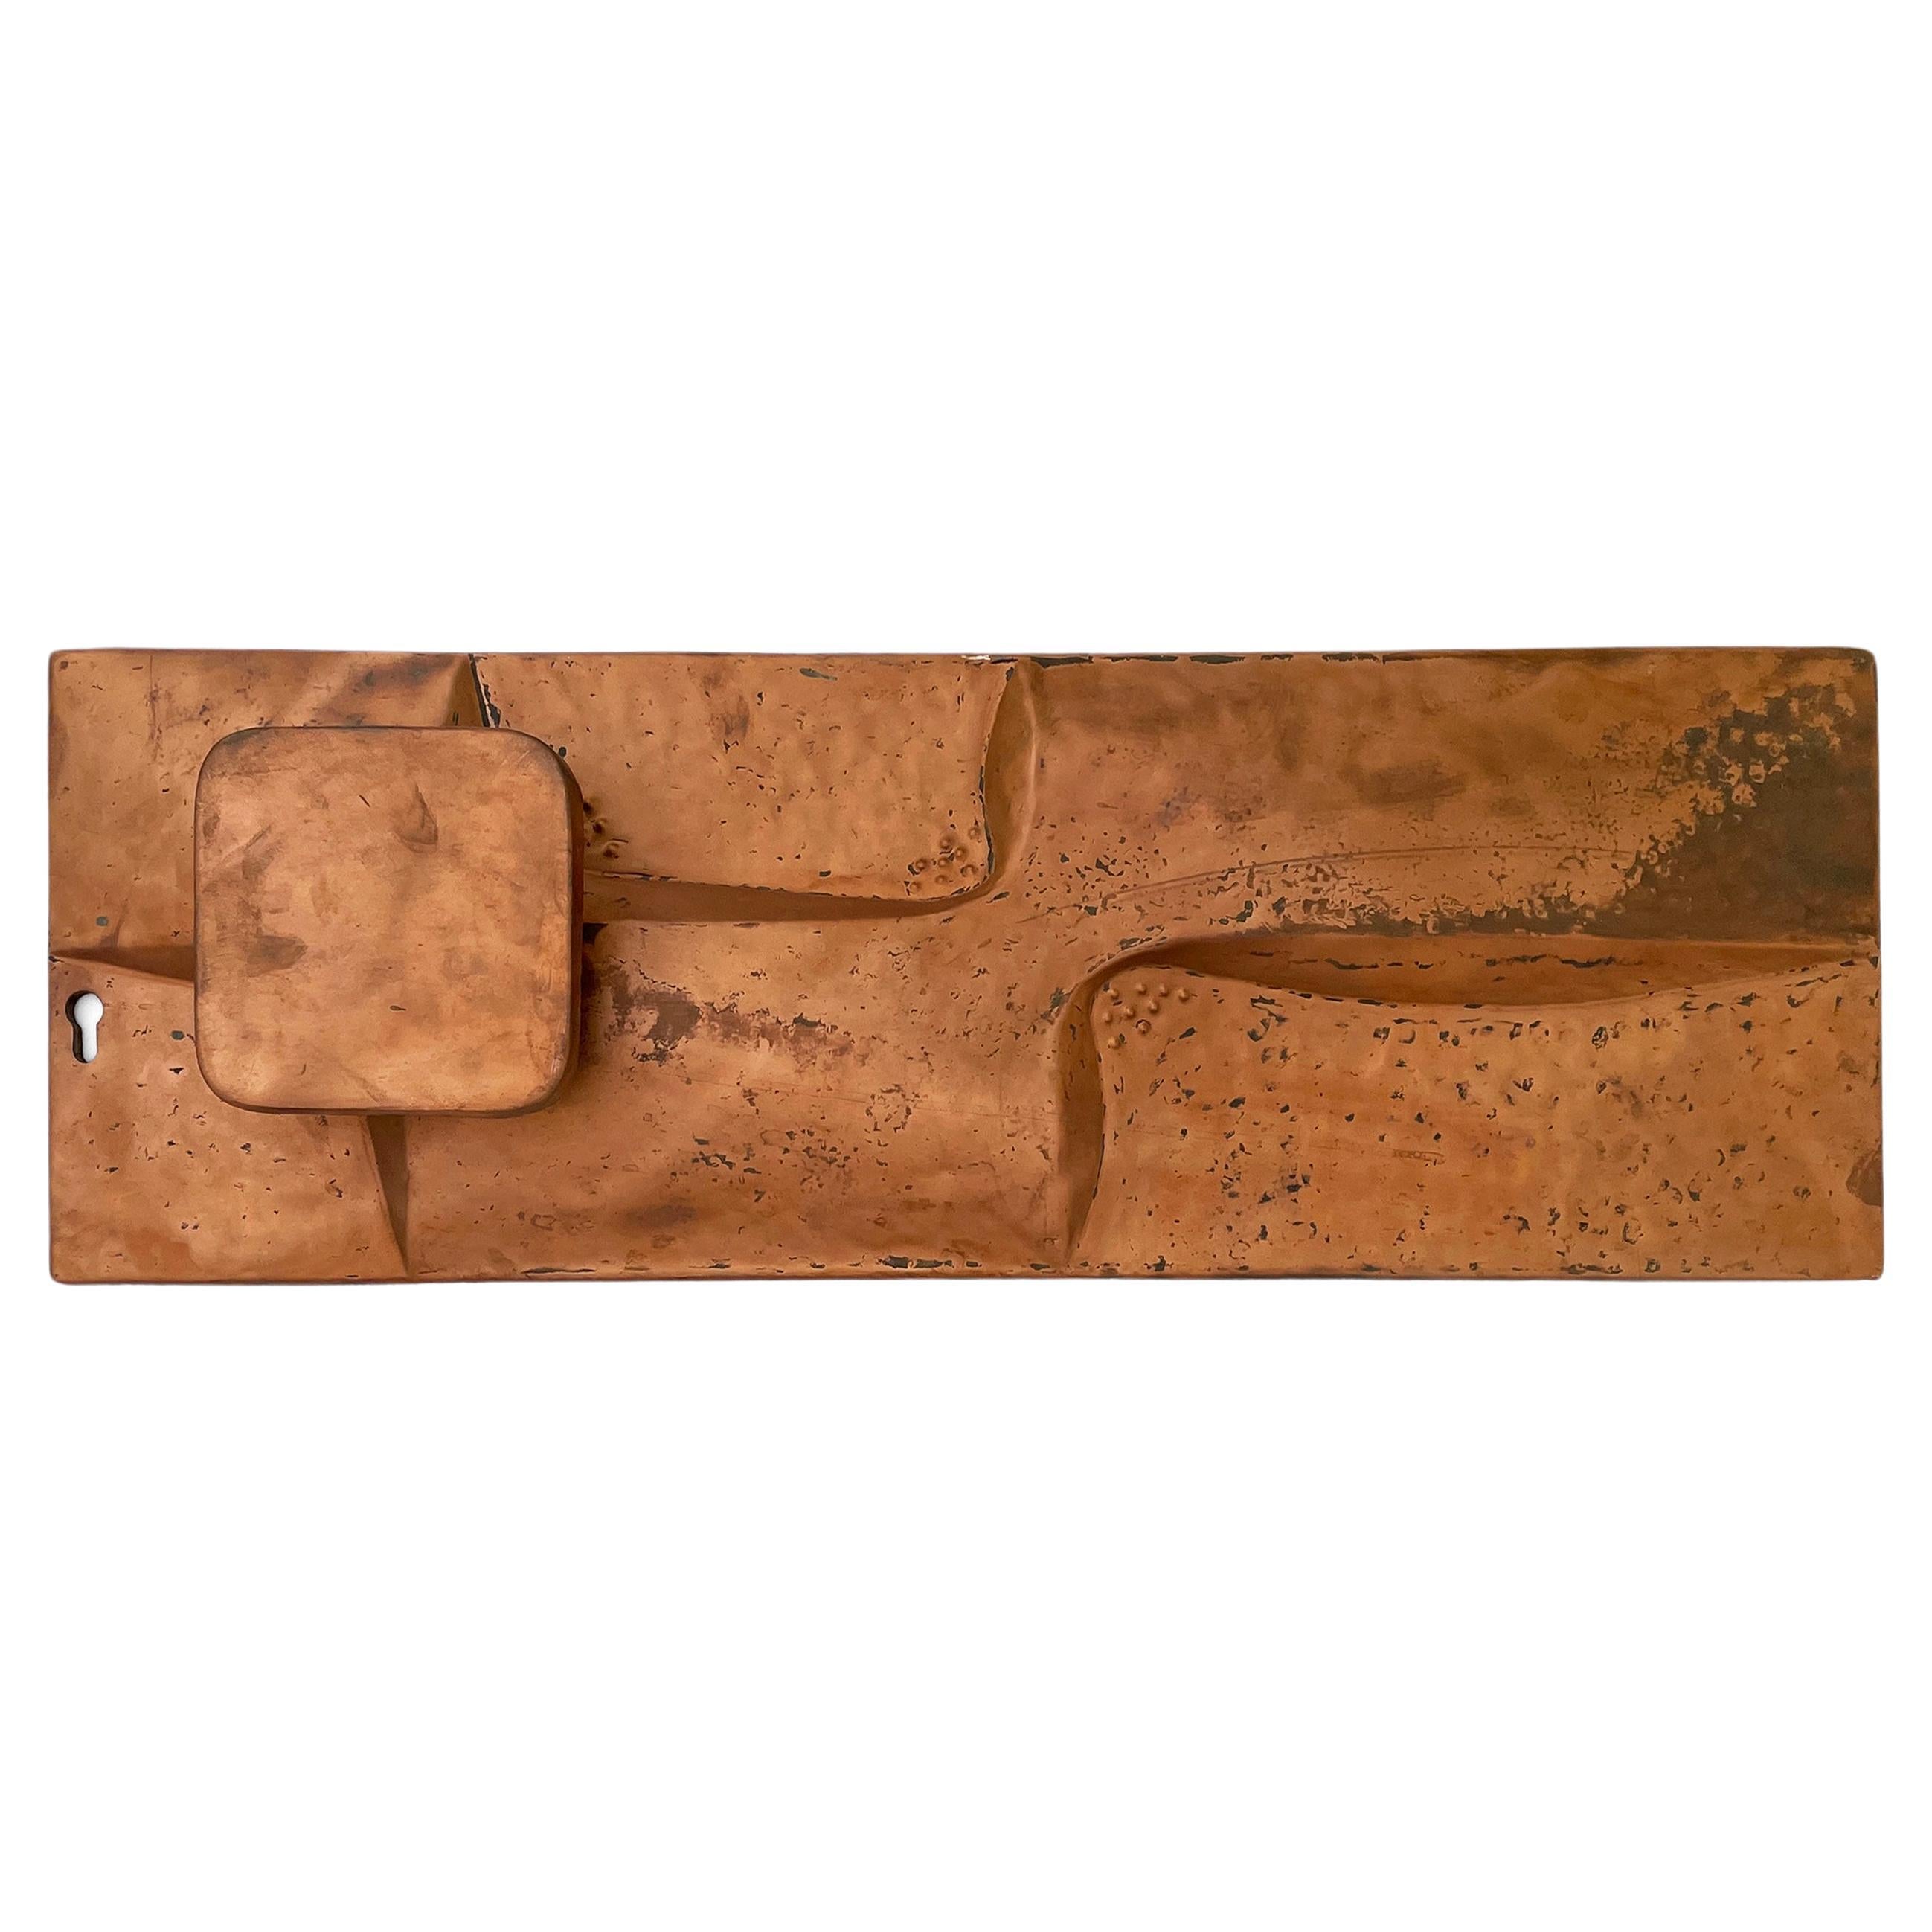 Large Lateral Brutalist Push & Pull Copper Door Handle, 1960s For Sale